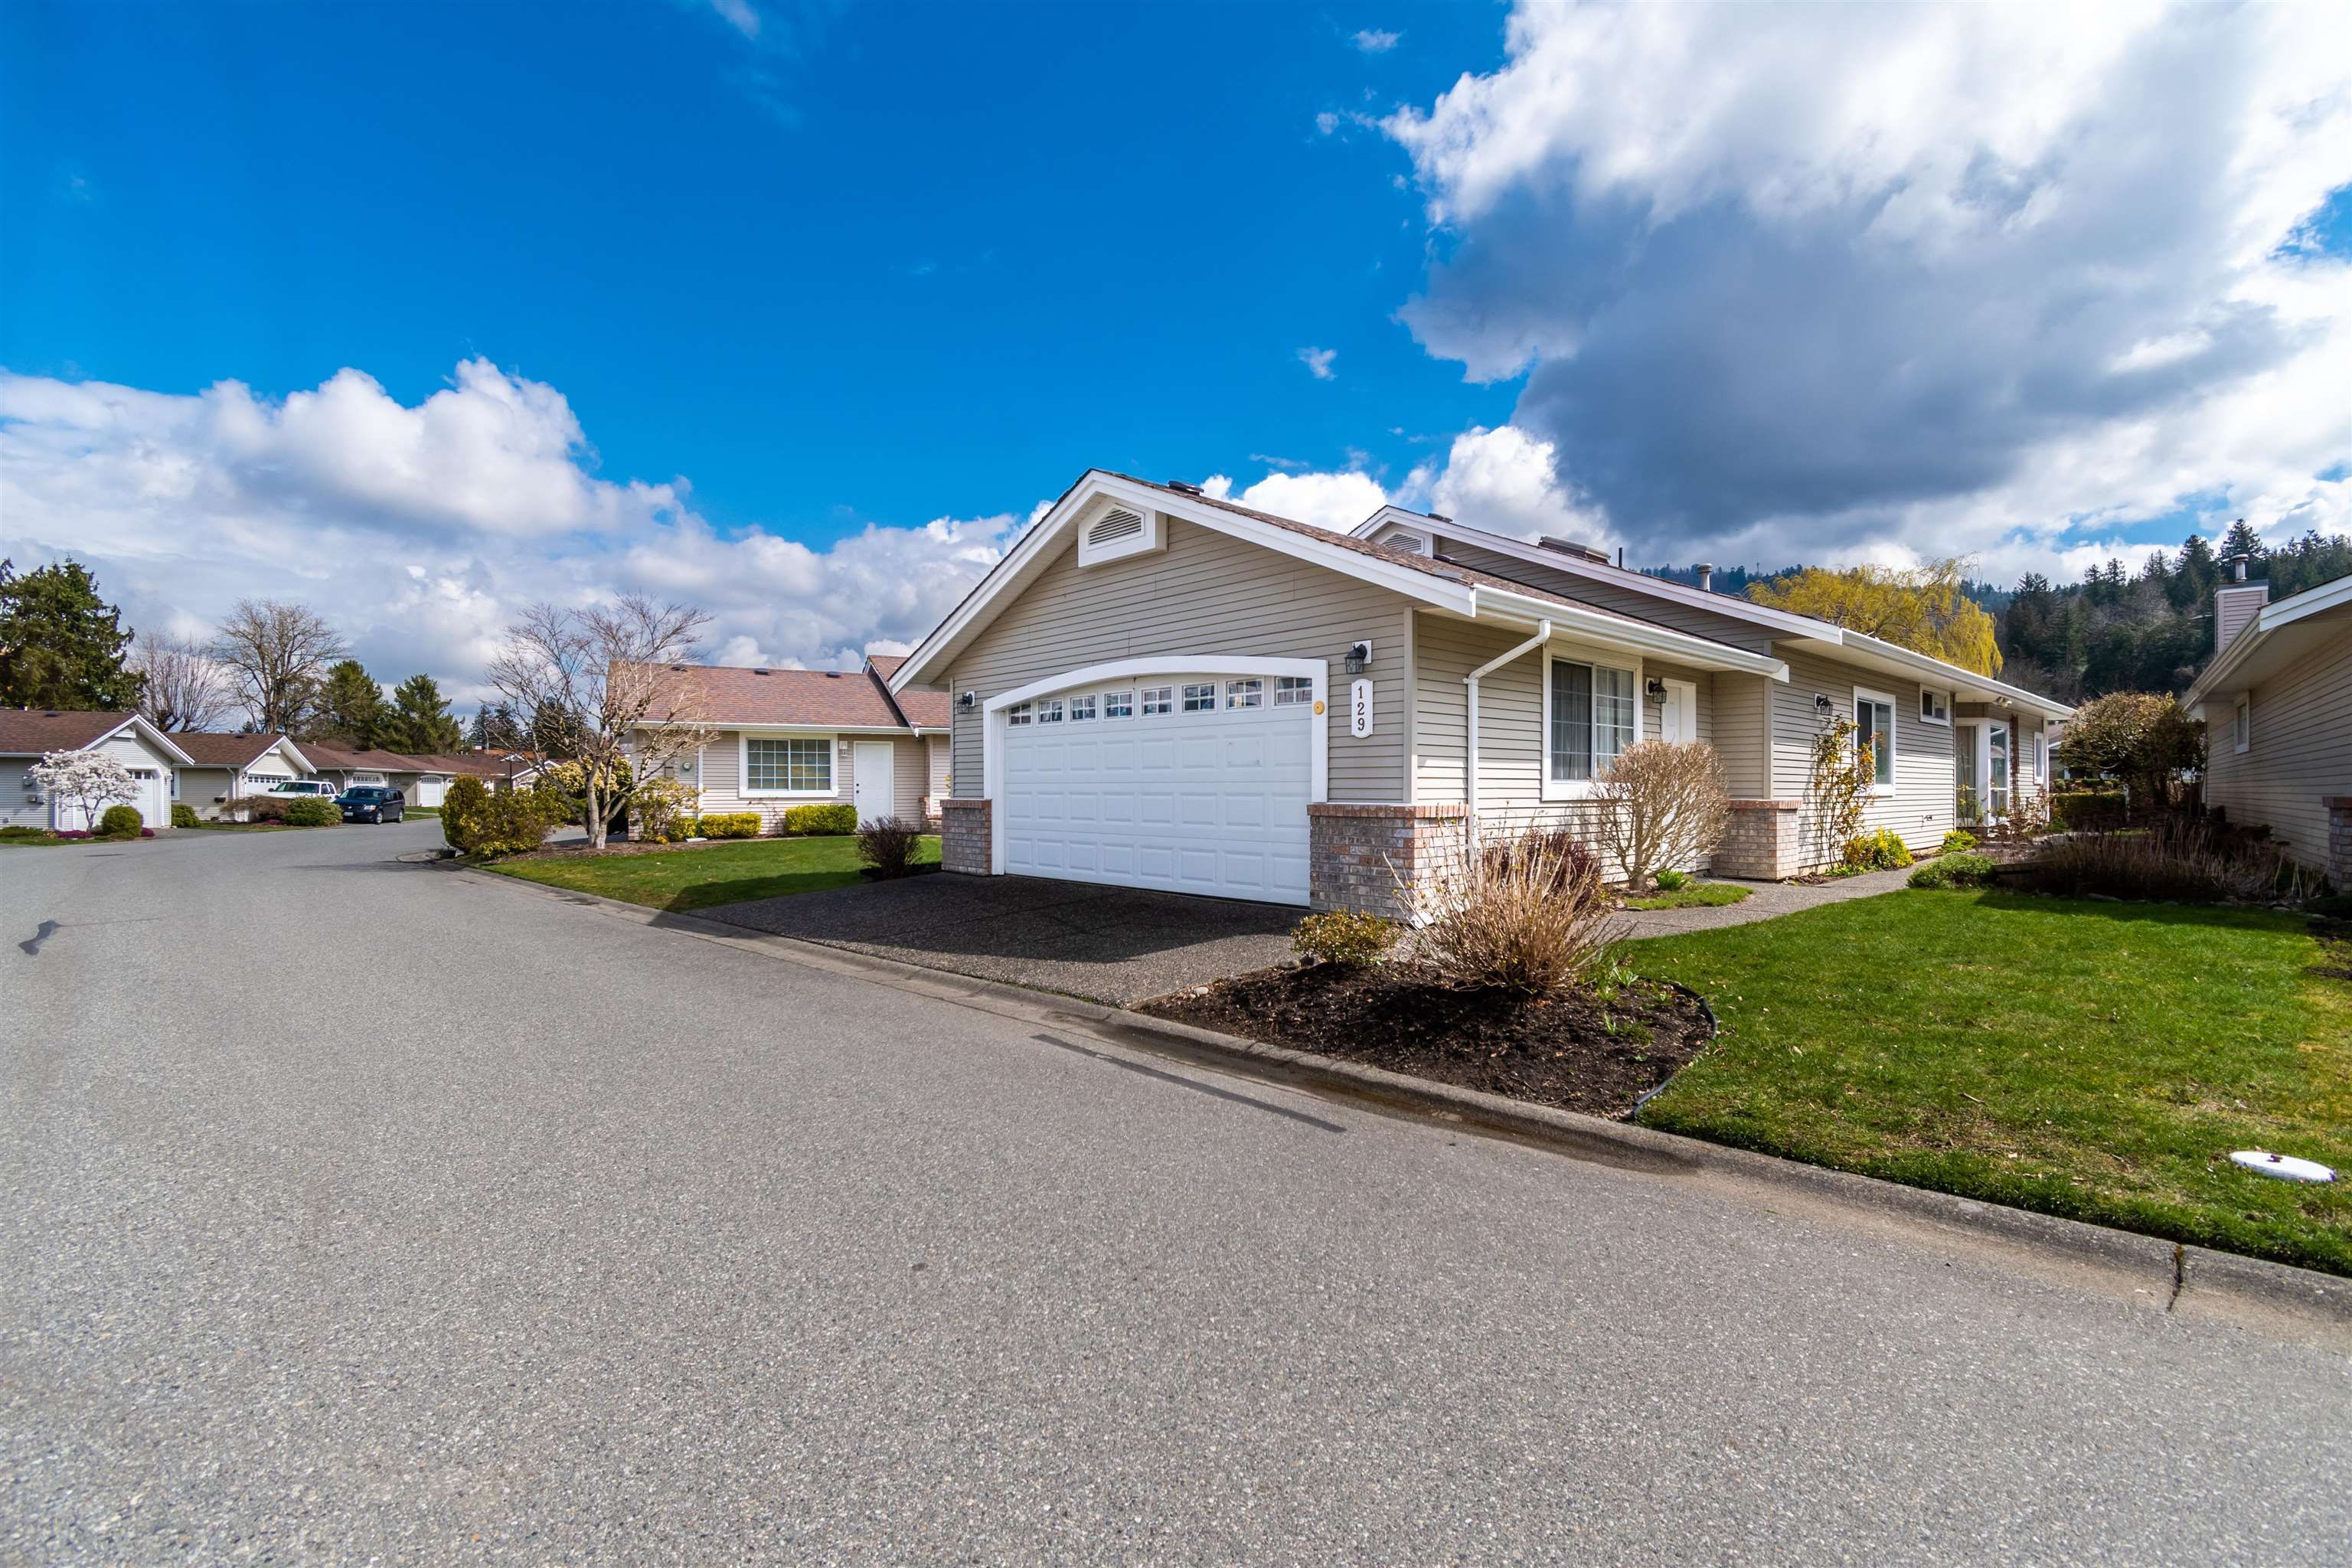 I have sold a property at 129 6001 PROMONTORY RD in Chilliwack
